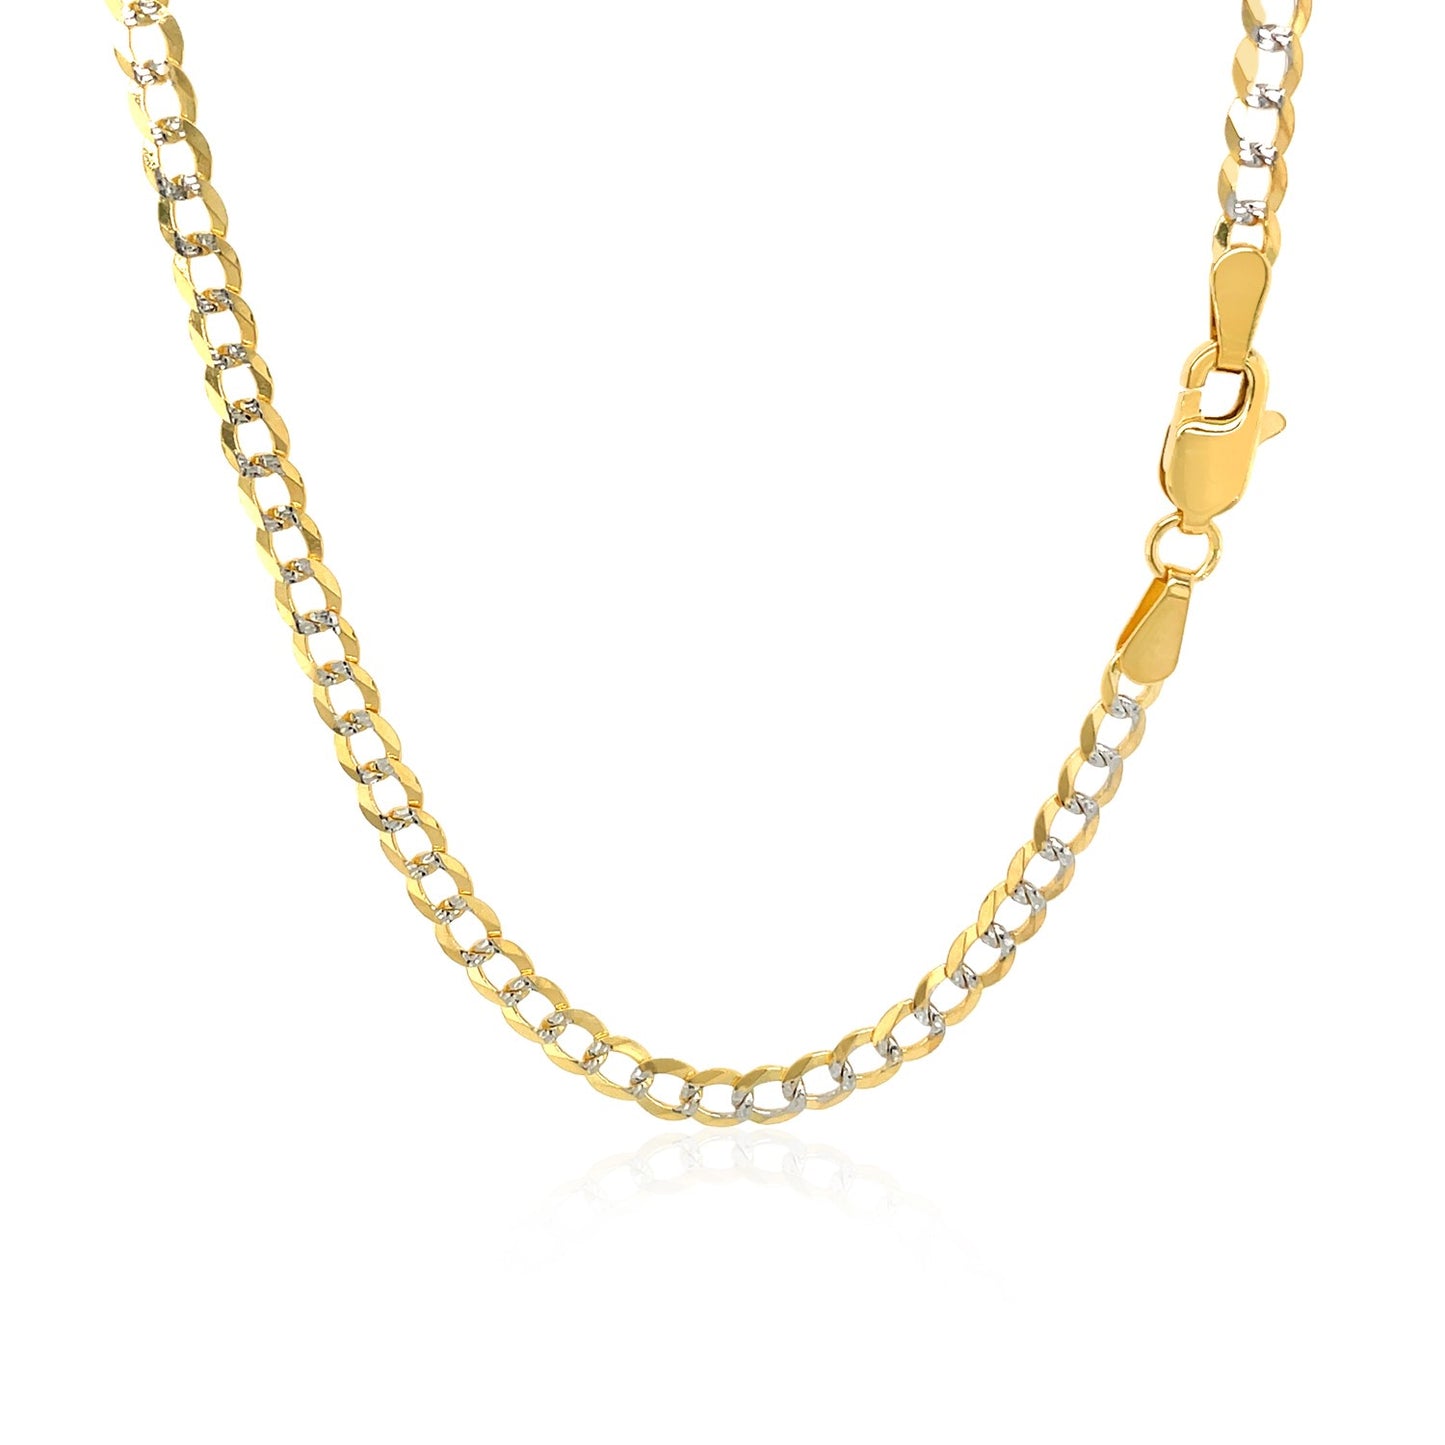 3.2 mm 14k Two Tone Gold Pave Curb Chain